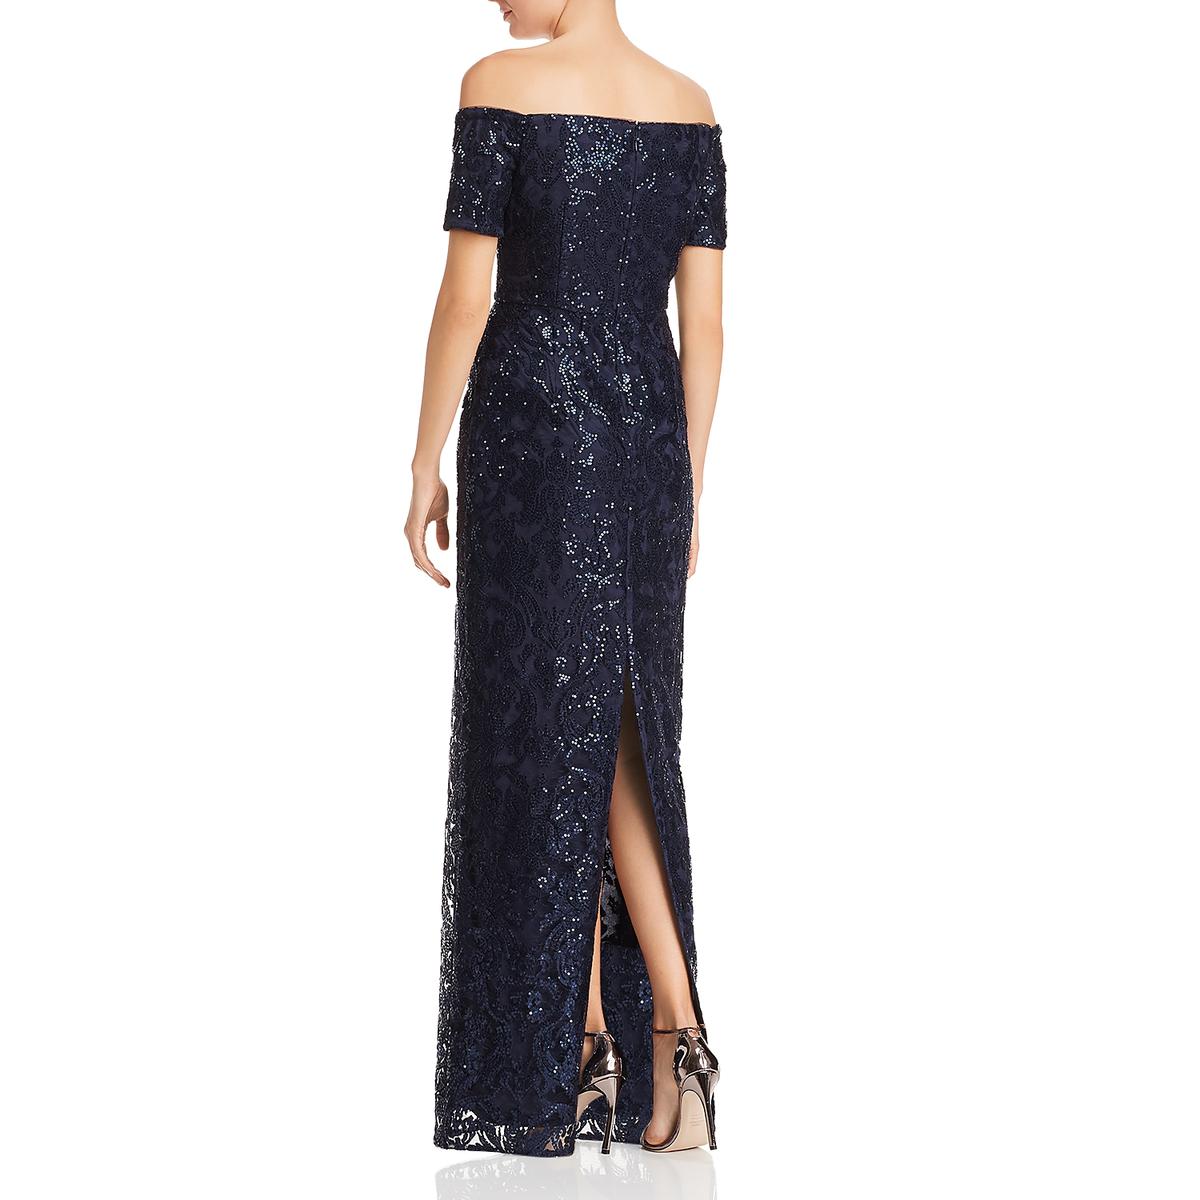 Adrianna Papell Womens Navy Sequined Formal Evening Dress Gown 2 BHFO ...